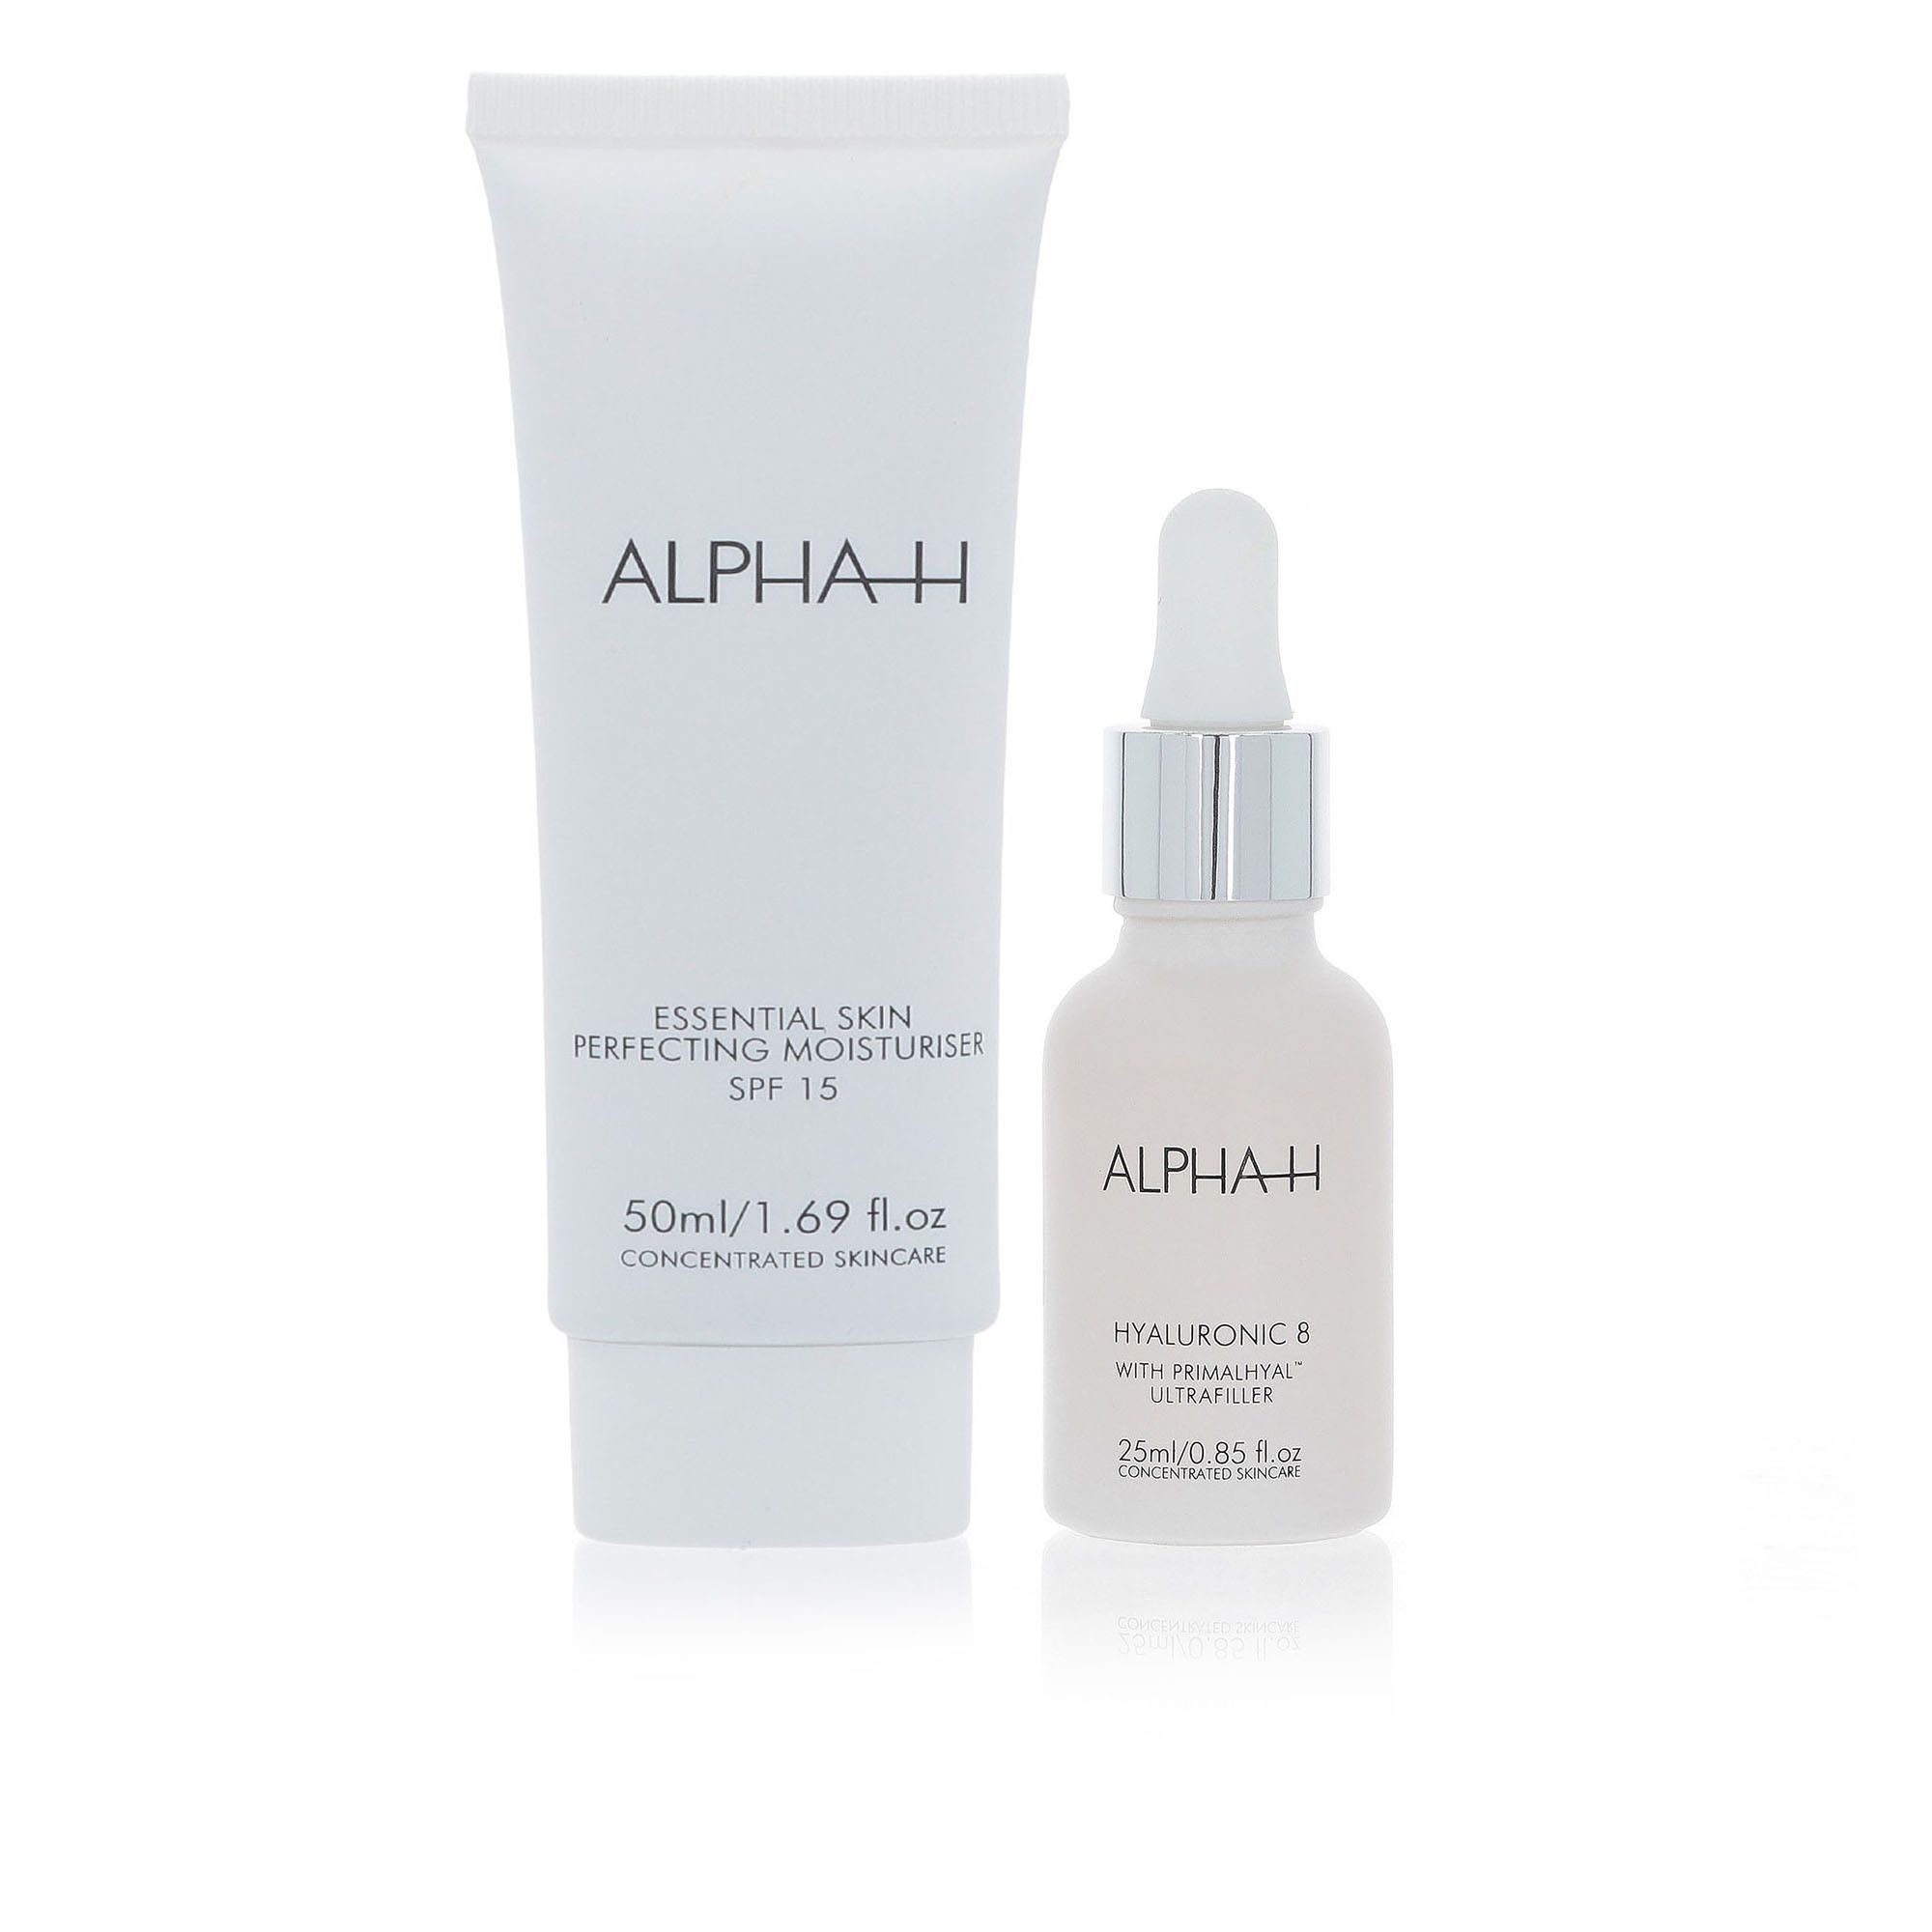 Plumping&Perfecting Duo: Essential Skin + Hyaluronic 8